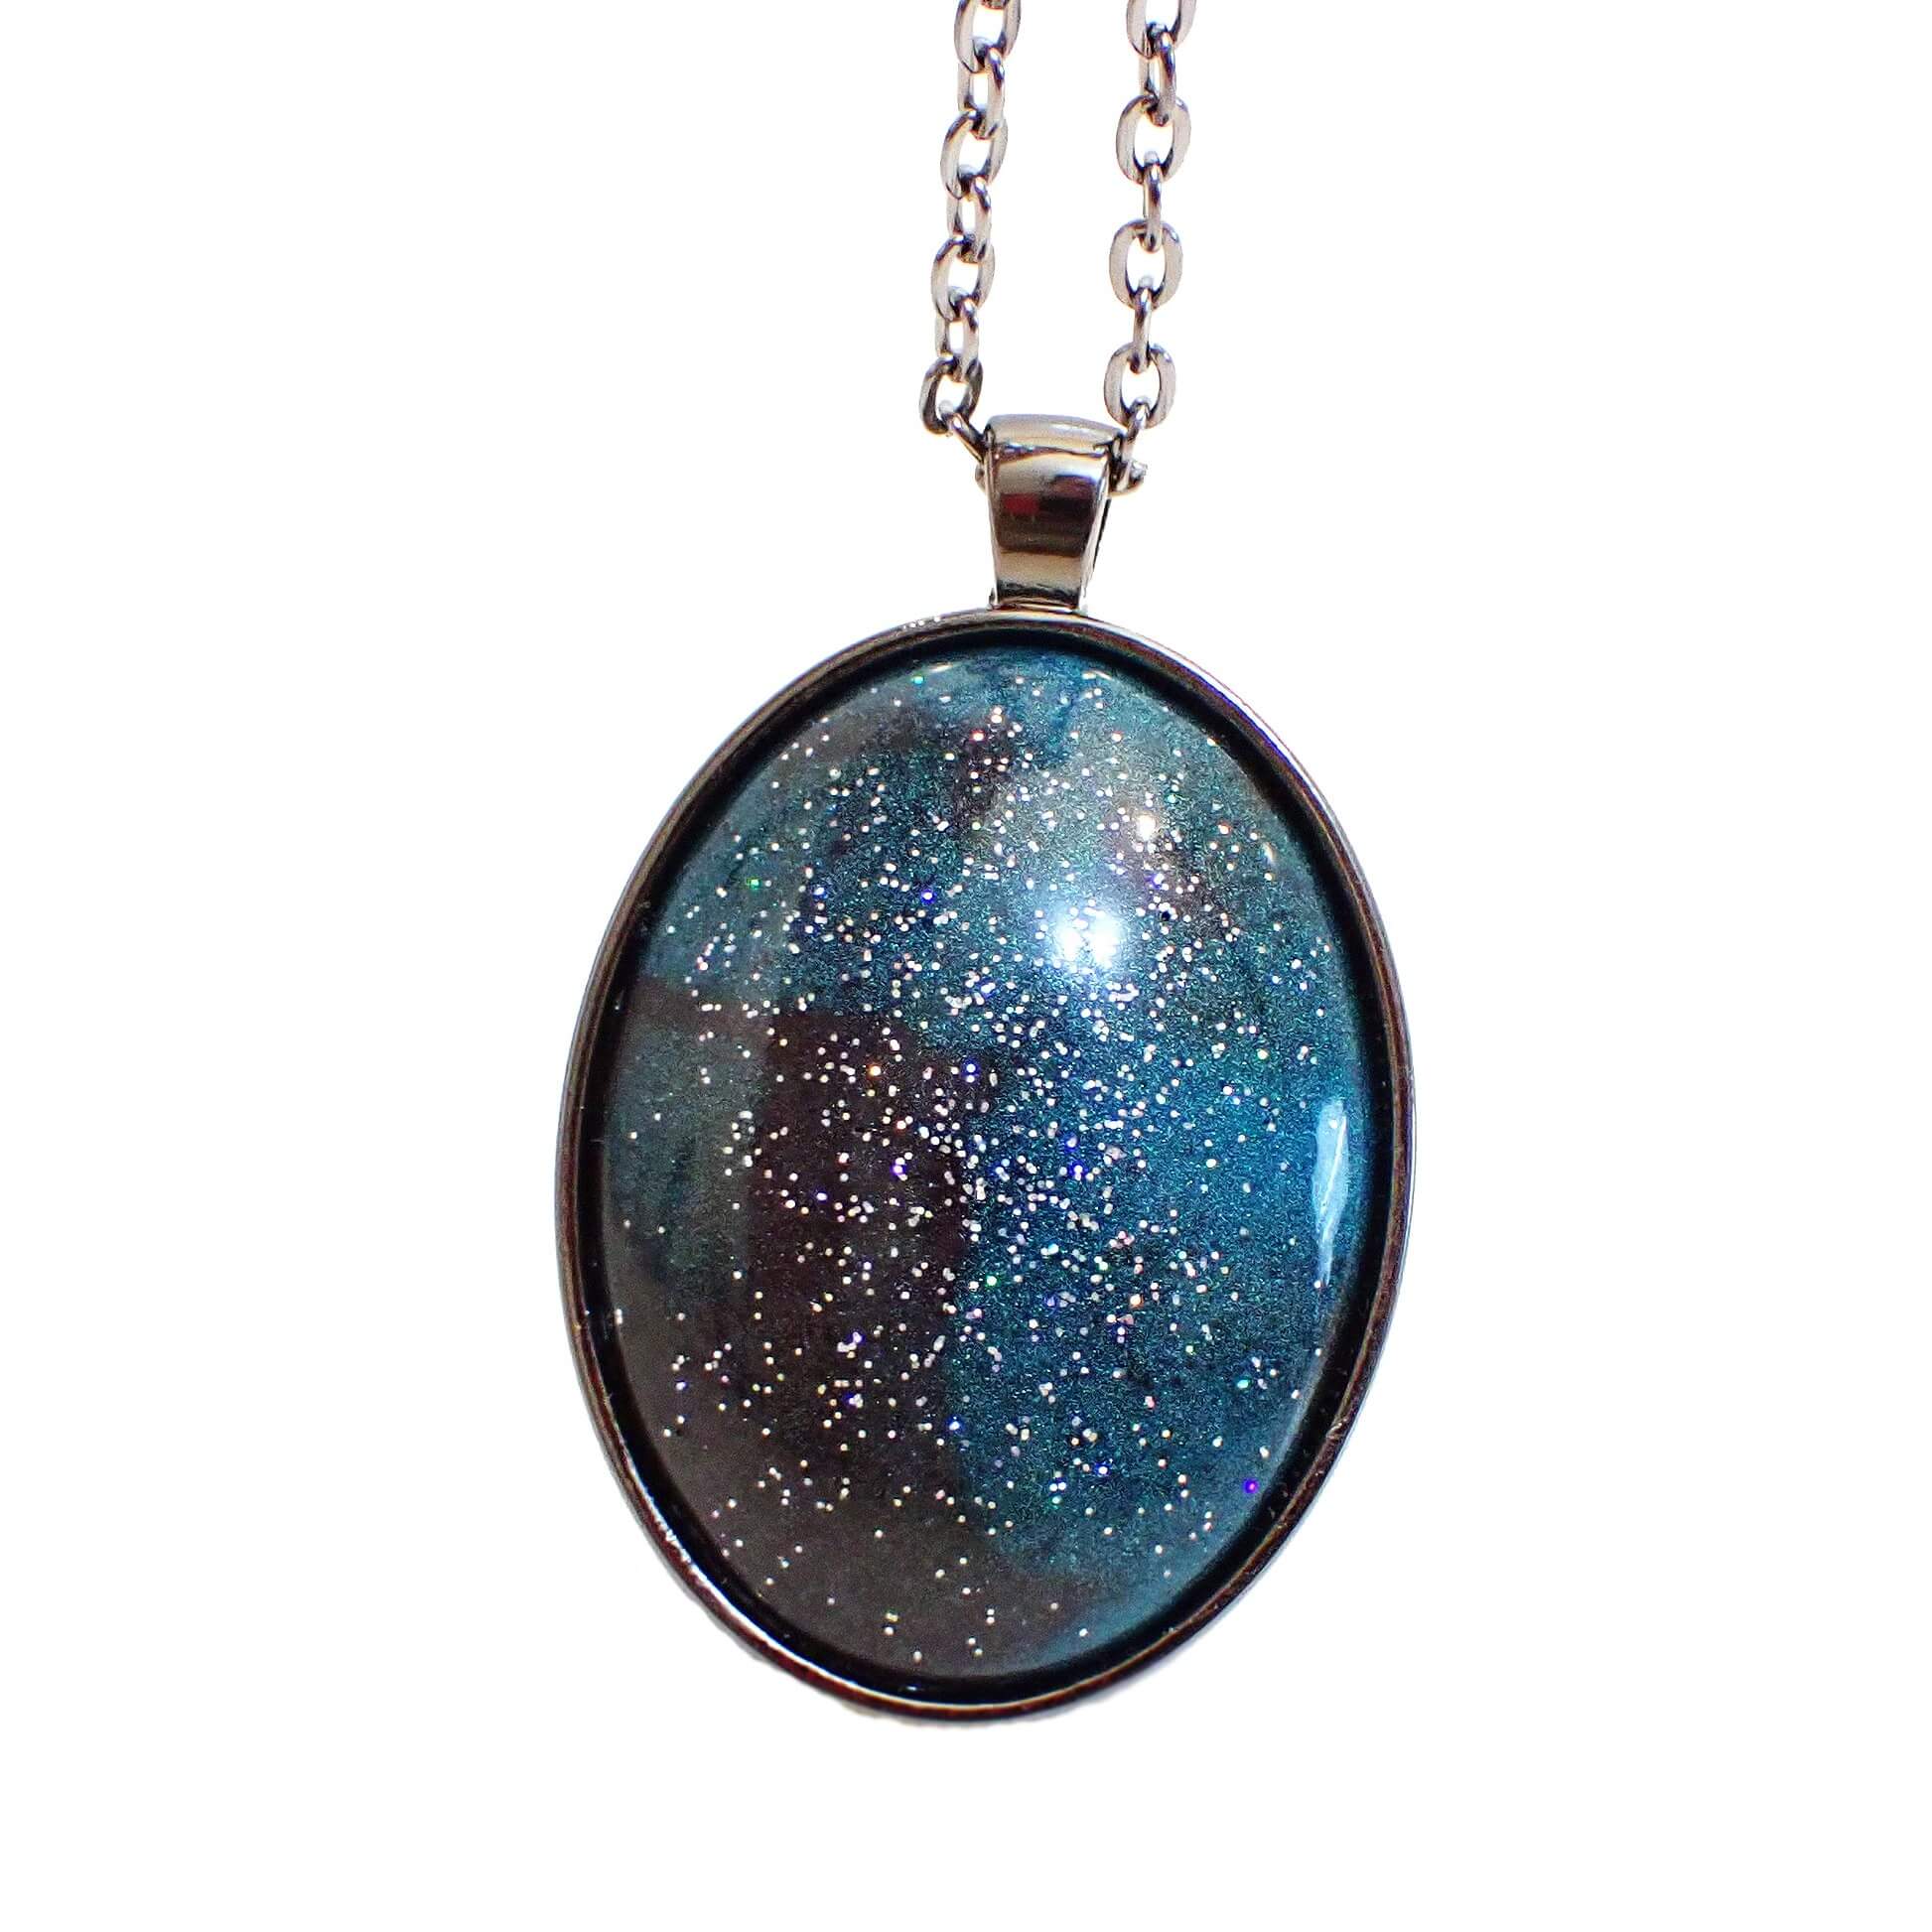 Enlarged front view of the handmade Goth pendant necklace. The metal is gunmetal gray in color on the chain and pendant setting. The pendant is a large domed oval with pearly dark gray and teal blue resin. There is silver holographic glitter embedded in the resin for tiny specks of sparkle and flashes of color as you move around in the light.